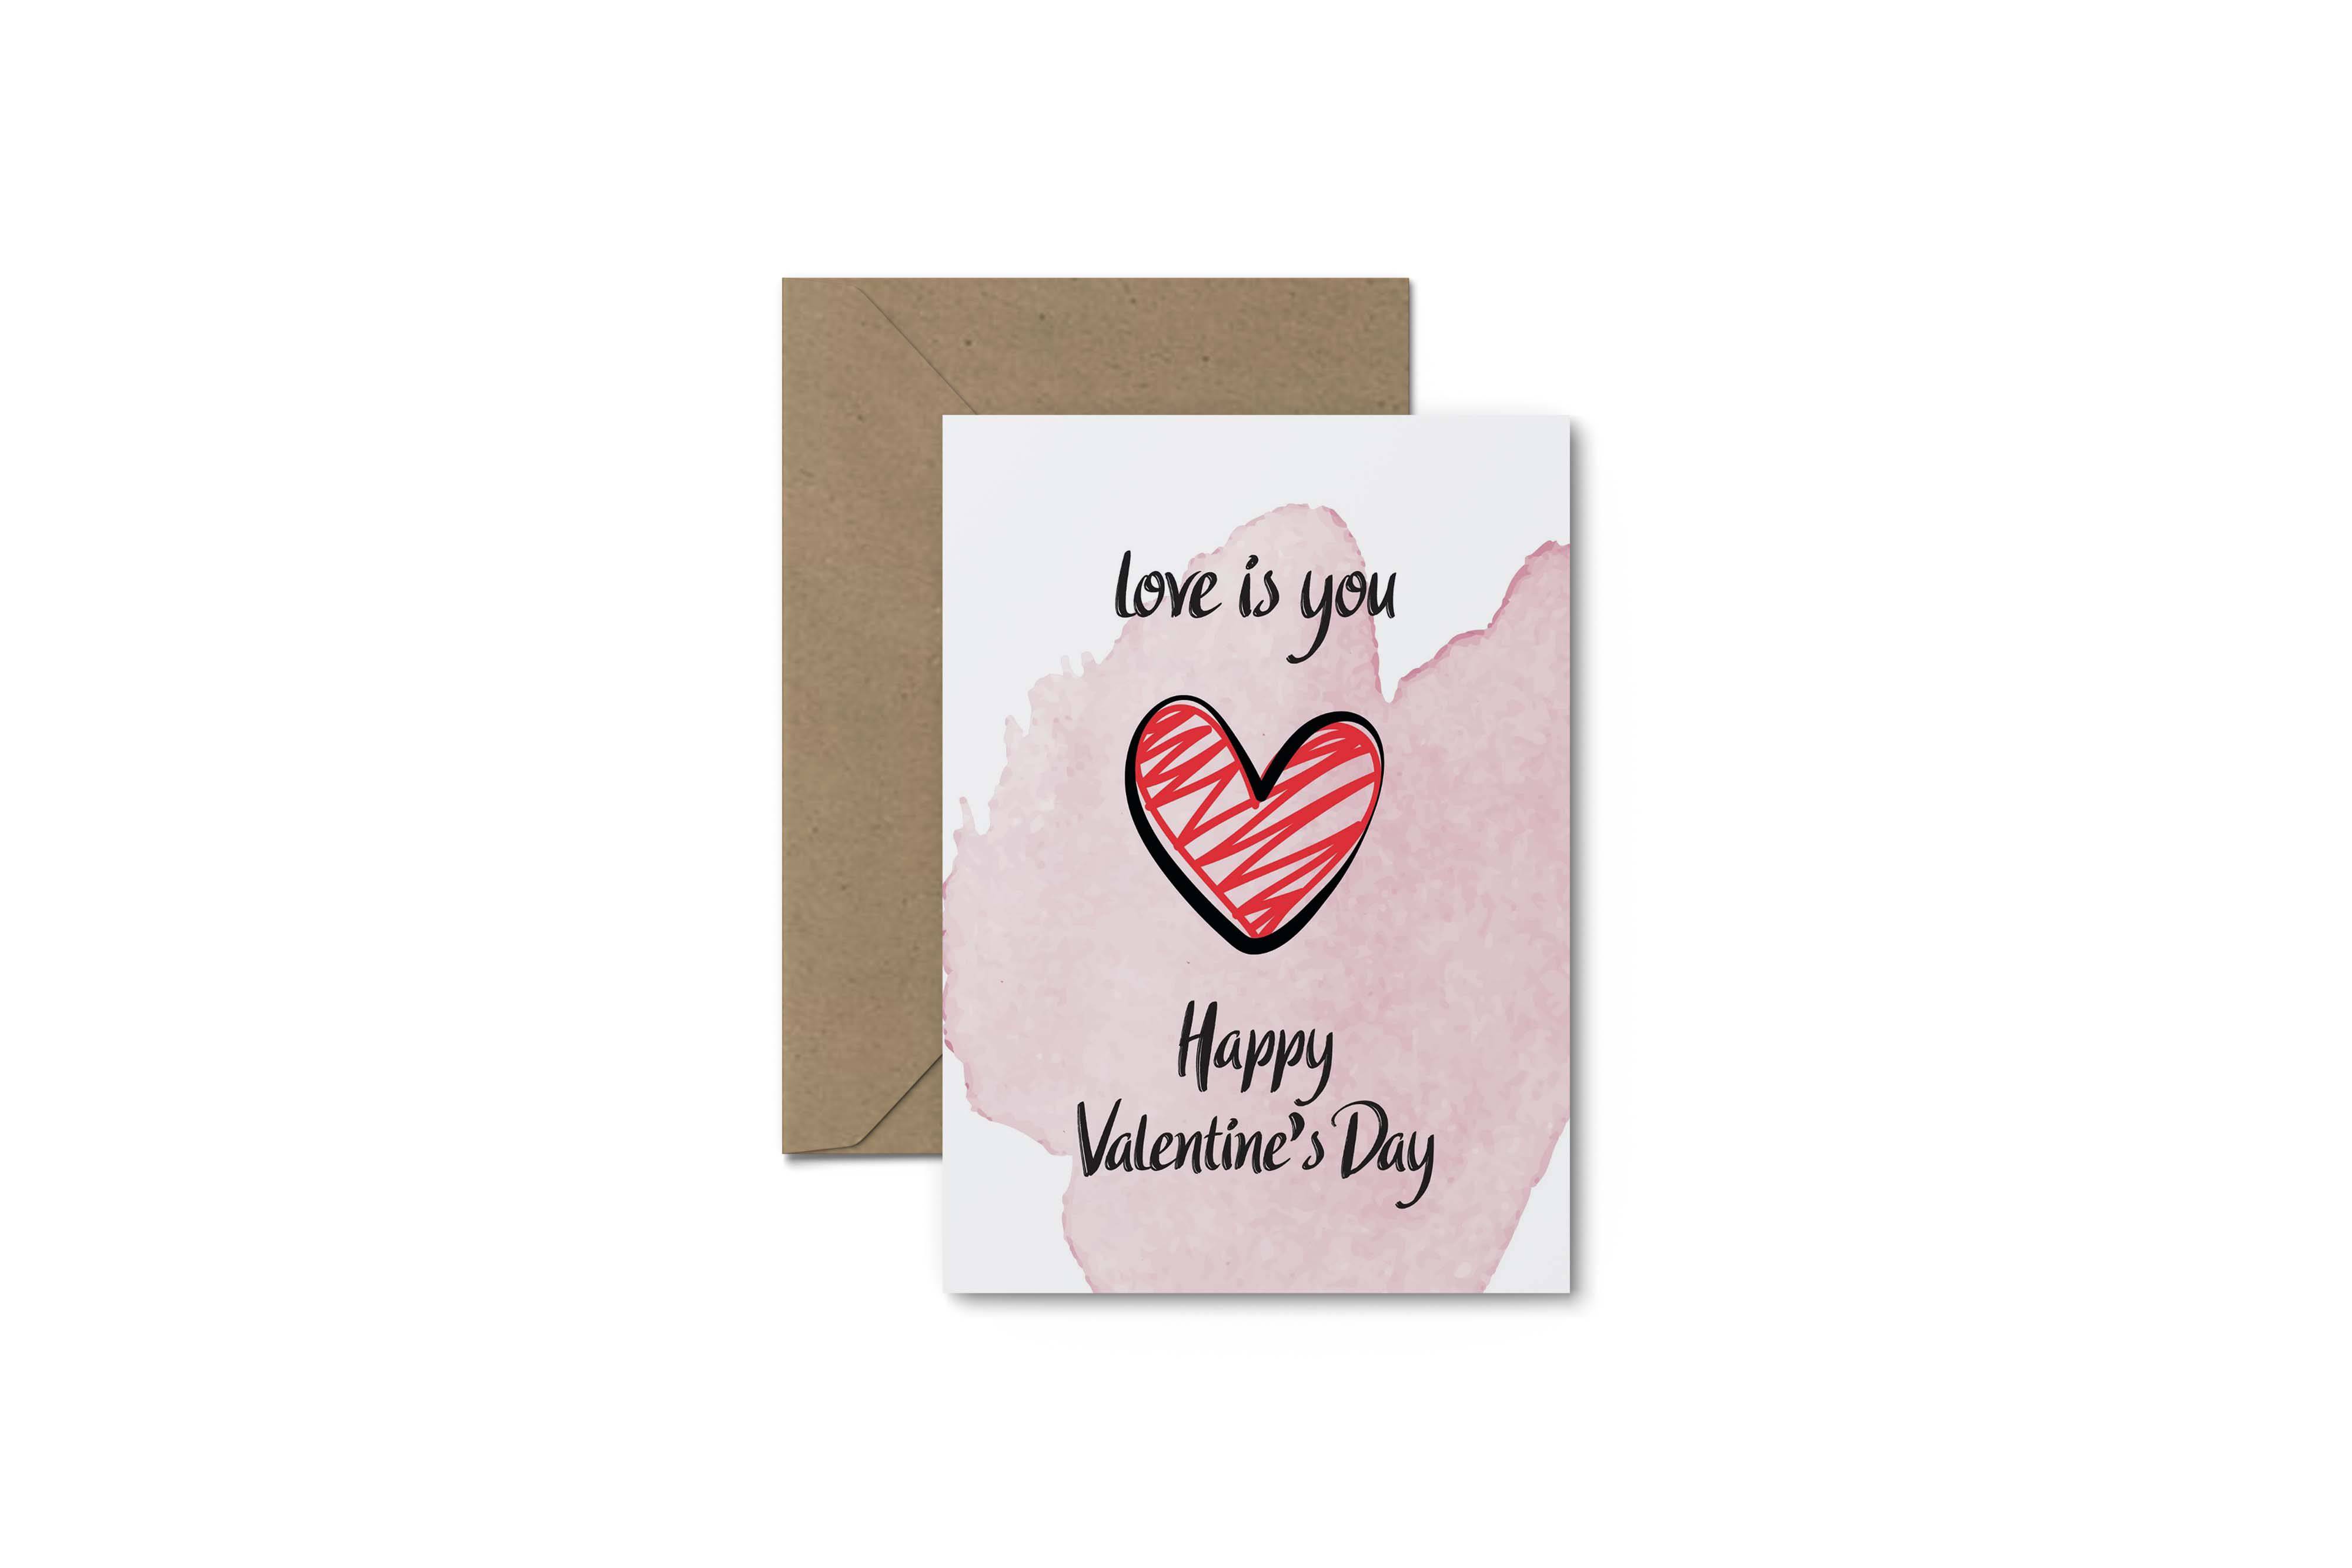 Love Is You! Valentine's Day Card - South of London